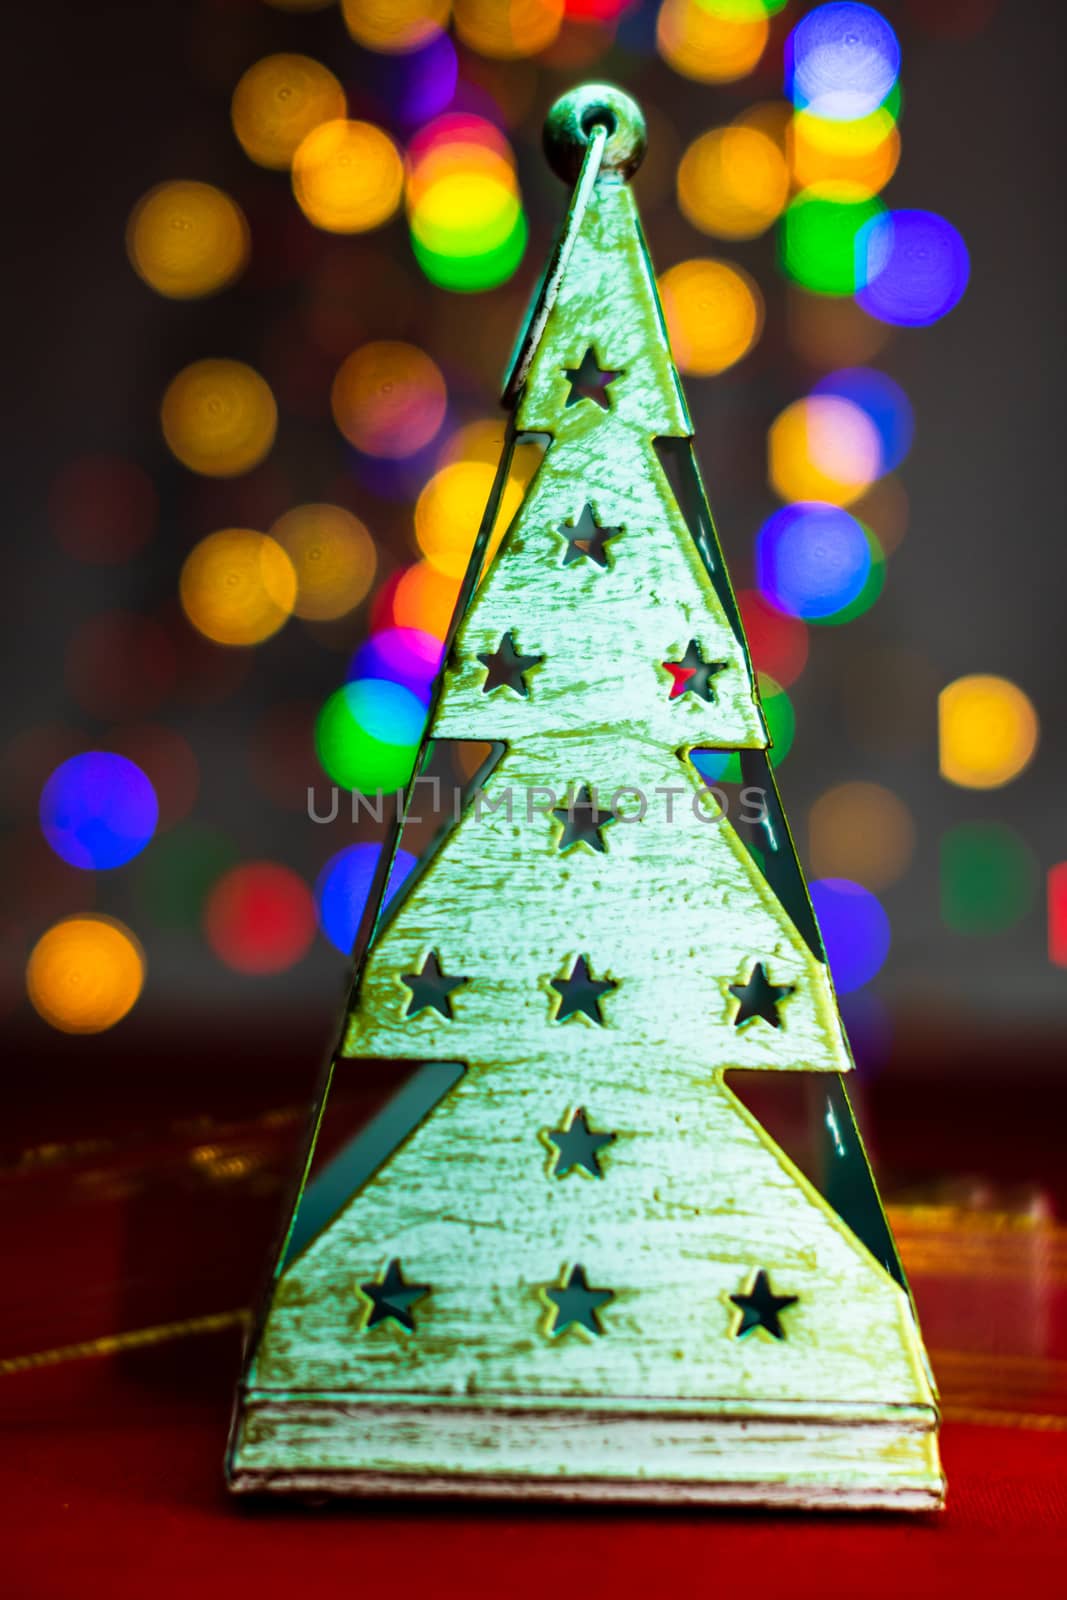 Christmas tree decoration ornament isolated on blurred background of  lights